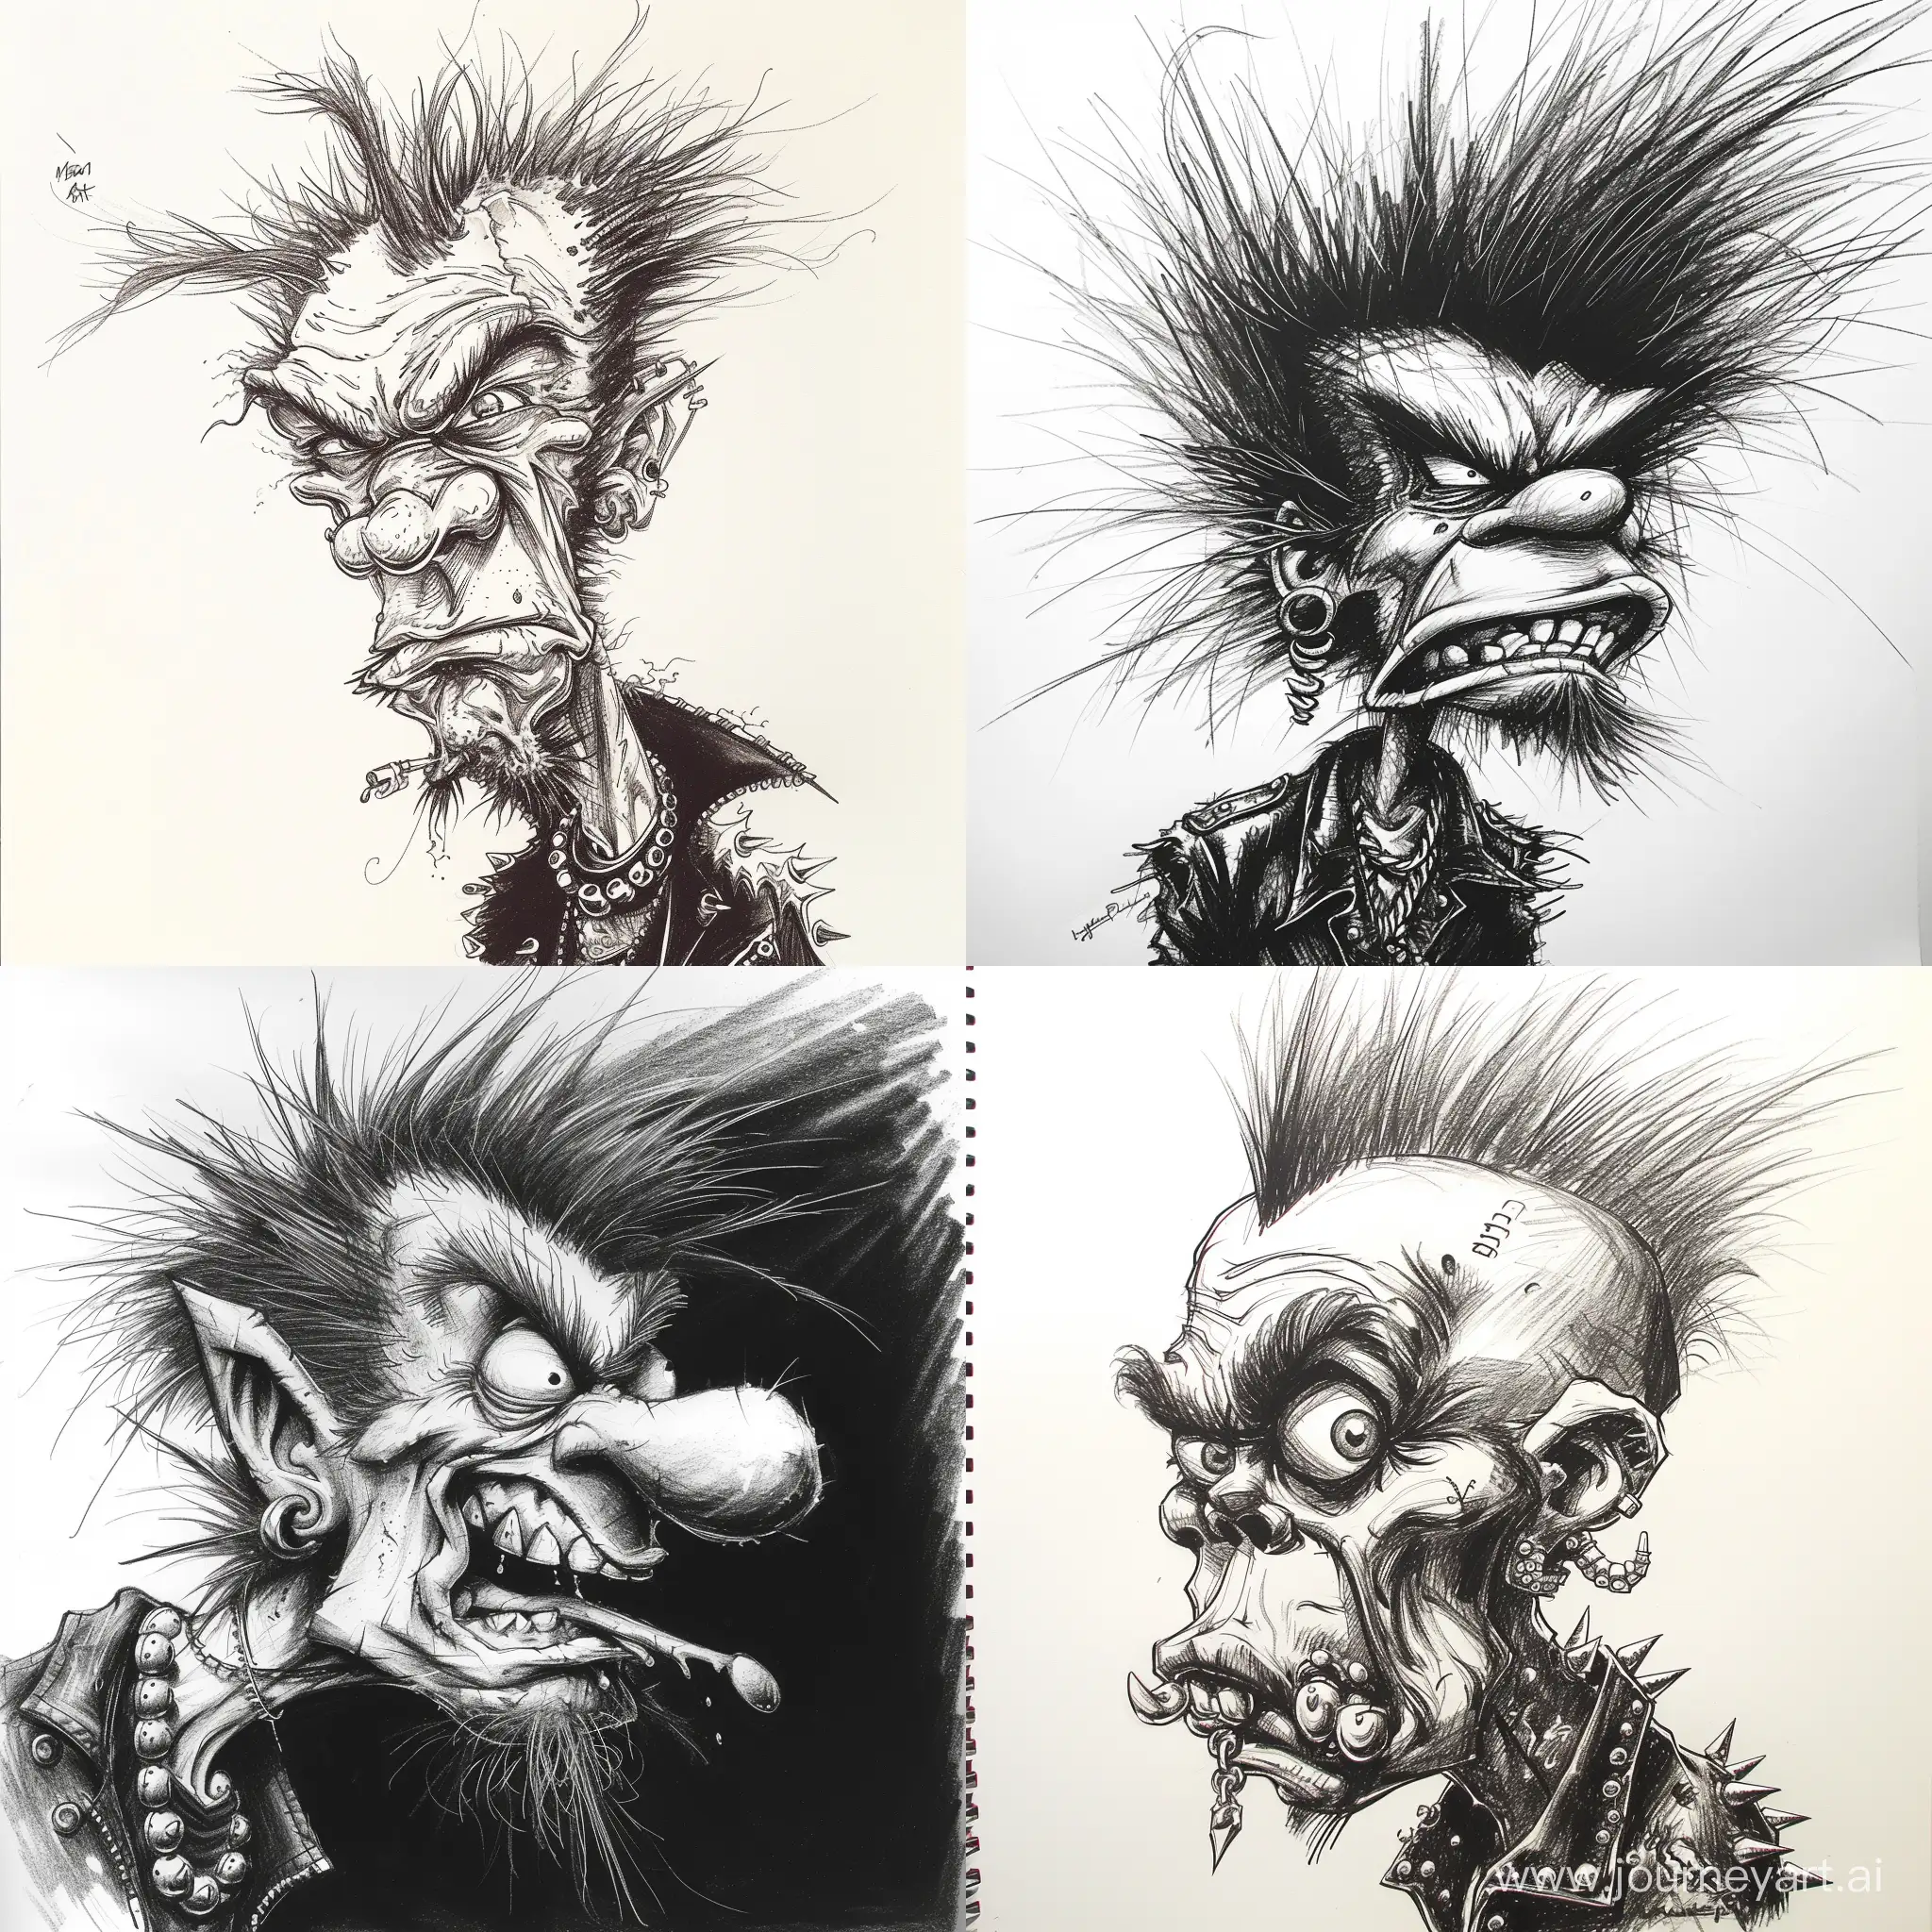 Exaggerated-Metalhead-Rock-Baby-Extreme-Caricature-Conte-Drawing